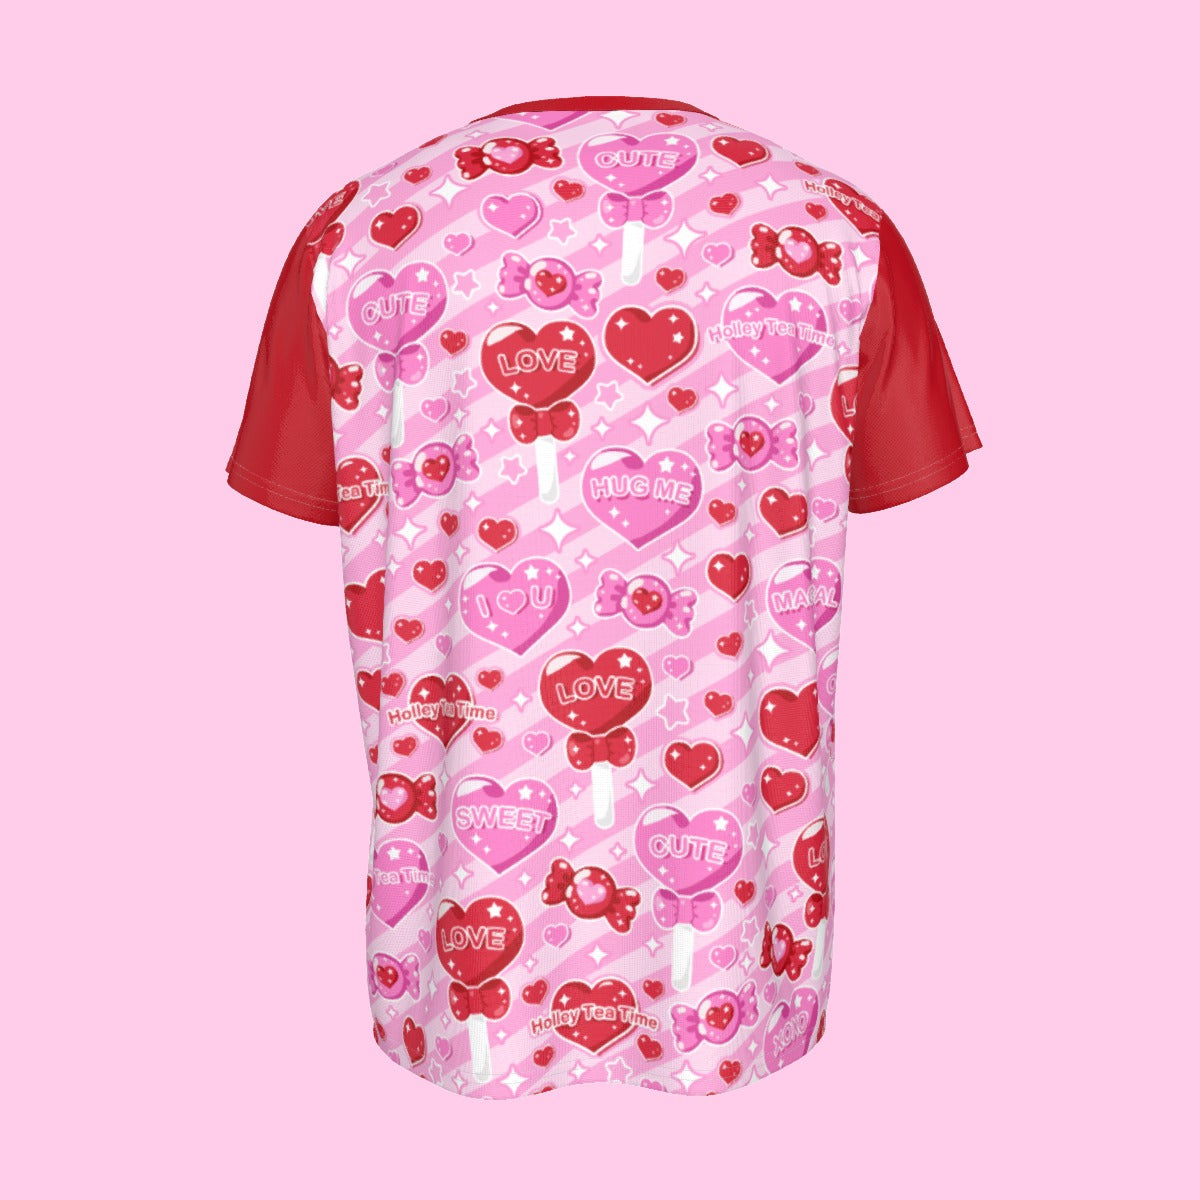 Candy Love Hearts (Red Cutie) Men's Round Neck Short Sleeve T-Shirt